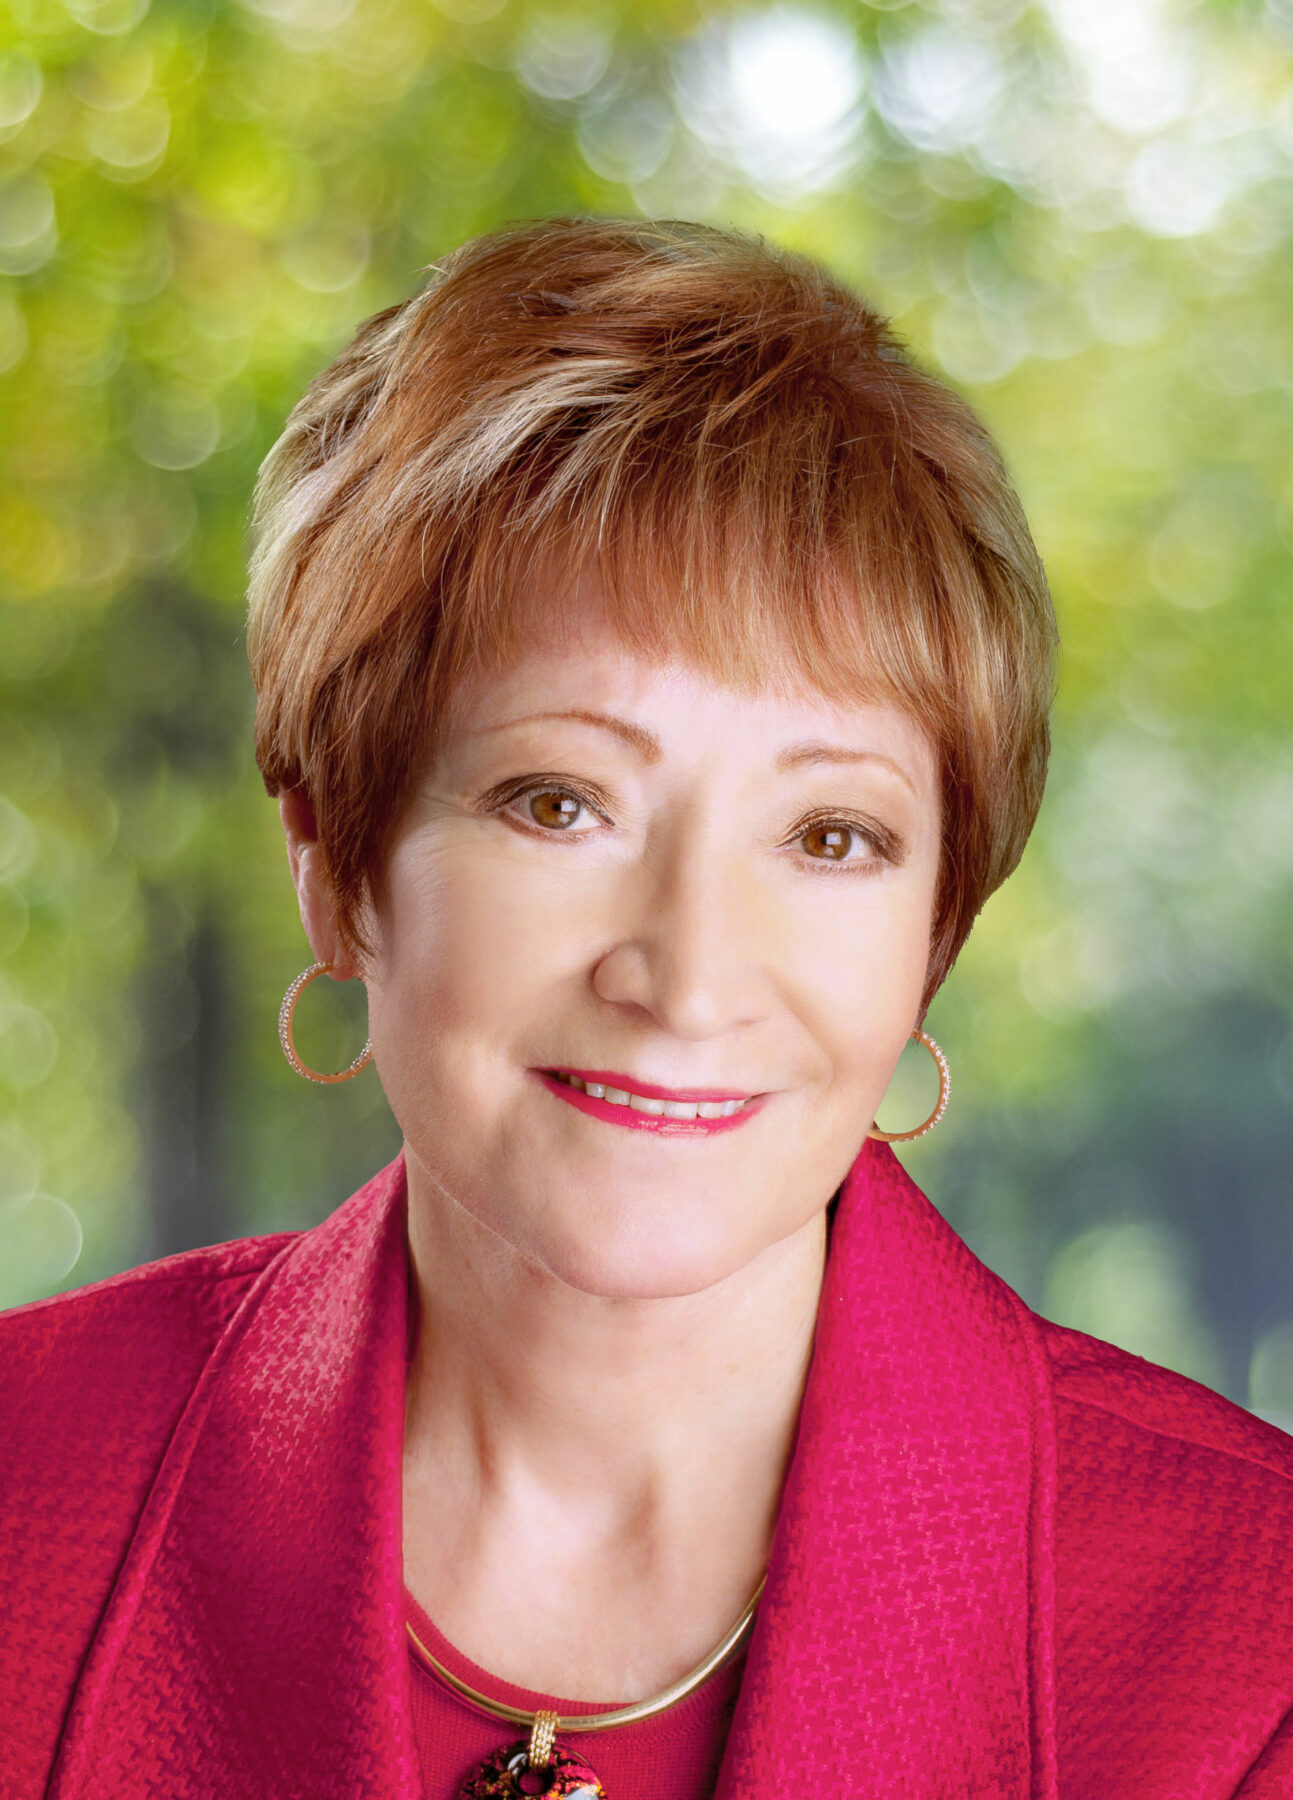 Woman with short auburn hair smiling, wearing a fuchsia blazer and blouse.